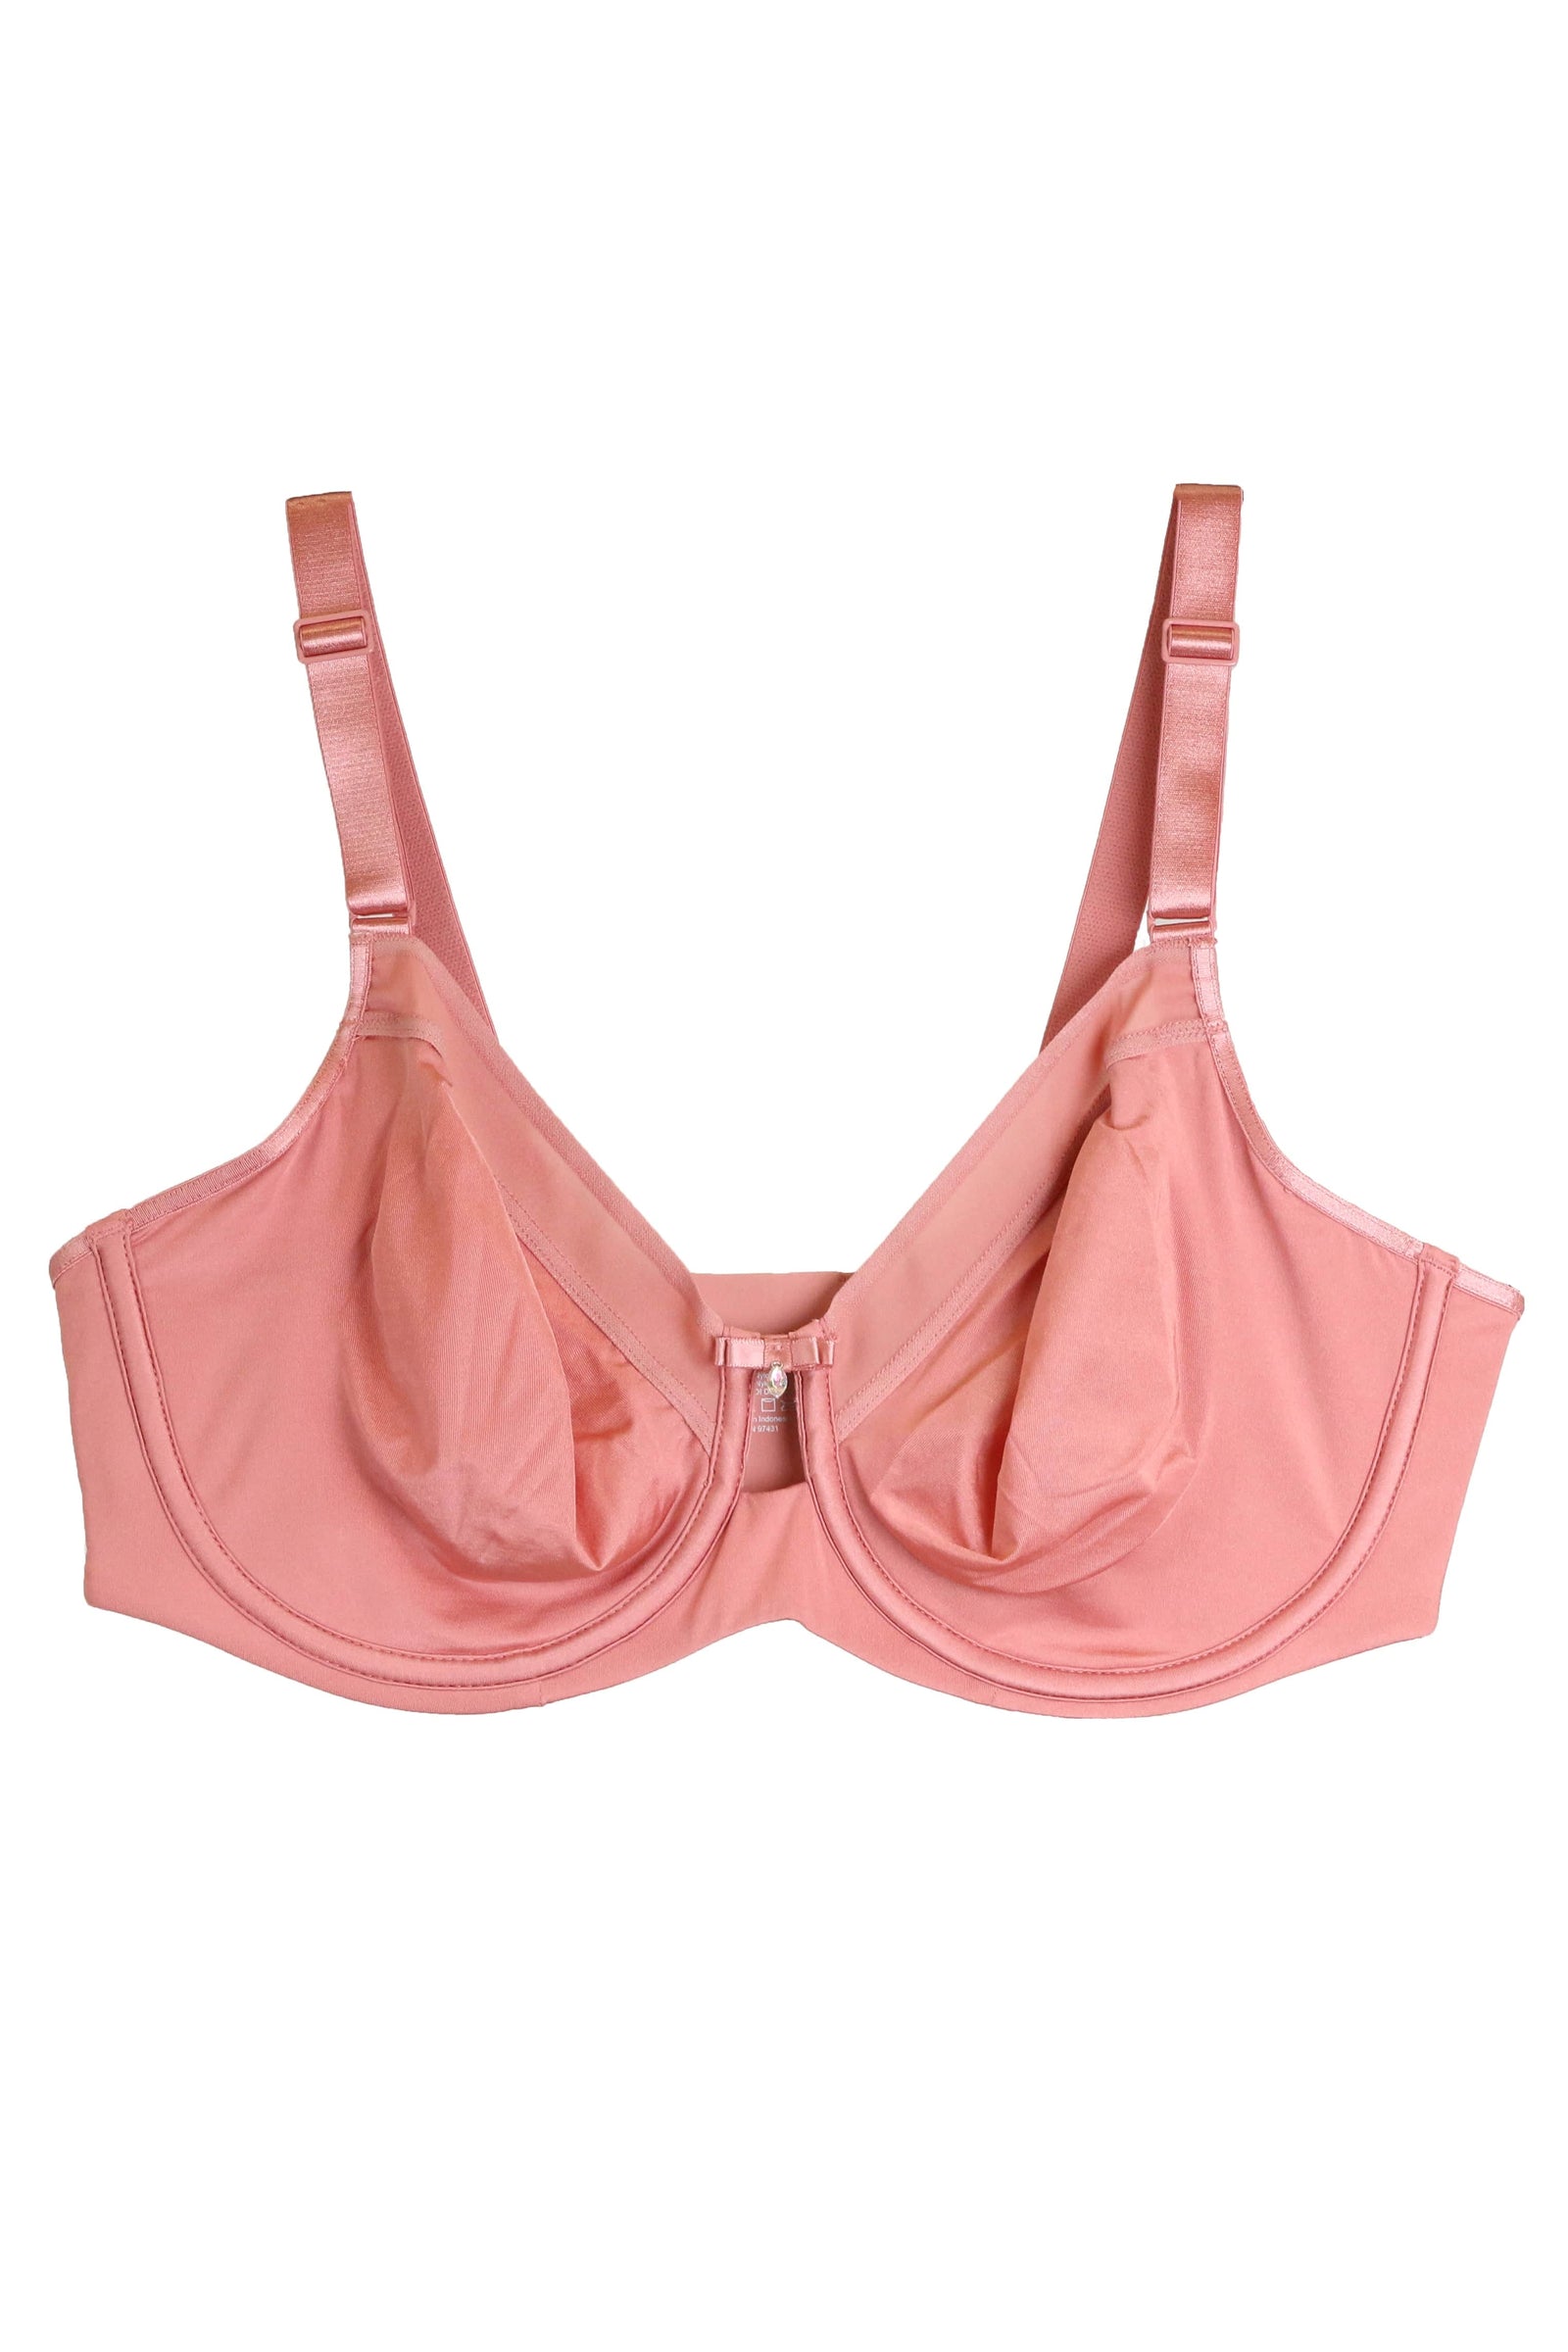 Ladies, here are 6 tell-tale signs it's time to replace your worn out bras  - CNA Lifestyle